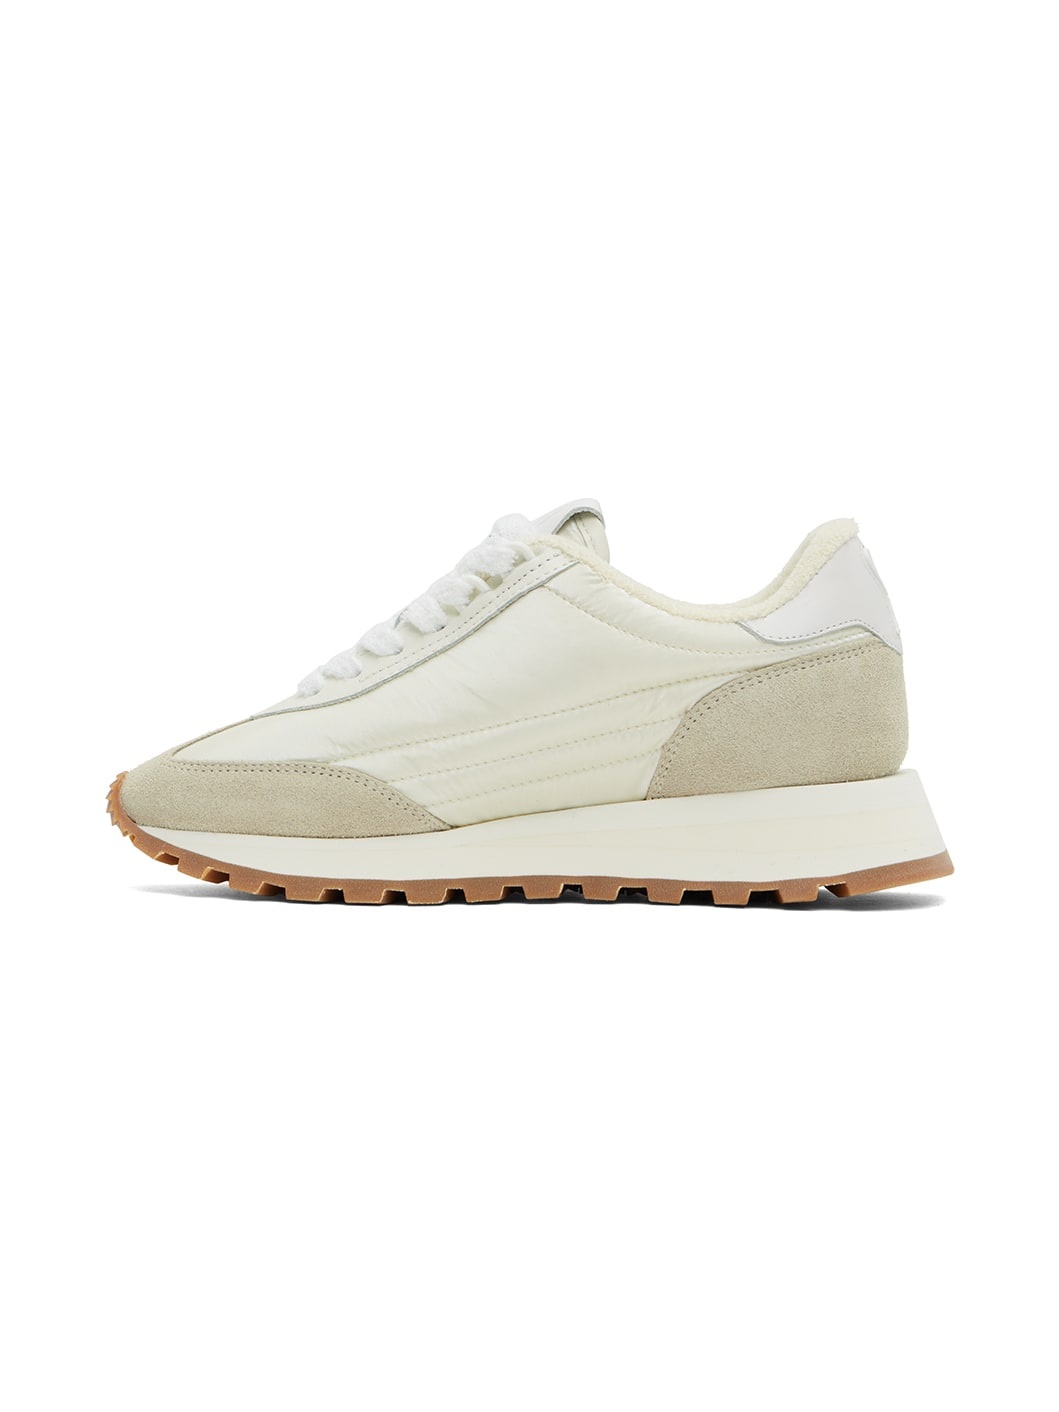 Off-White & Beige Rush Sneakers - 3